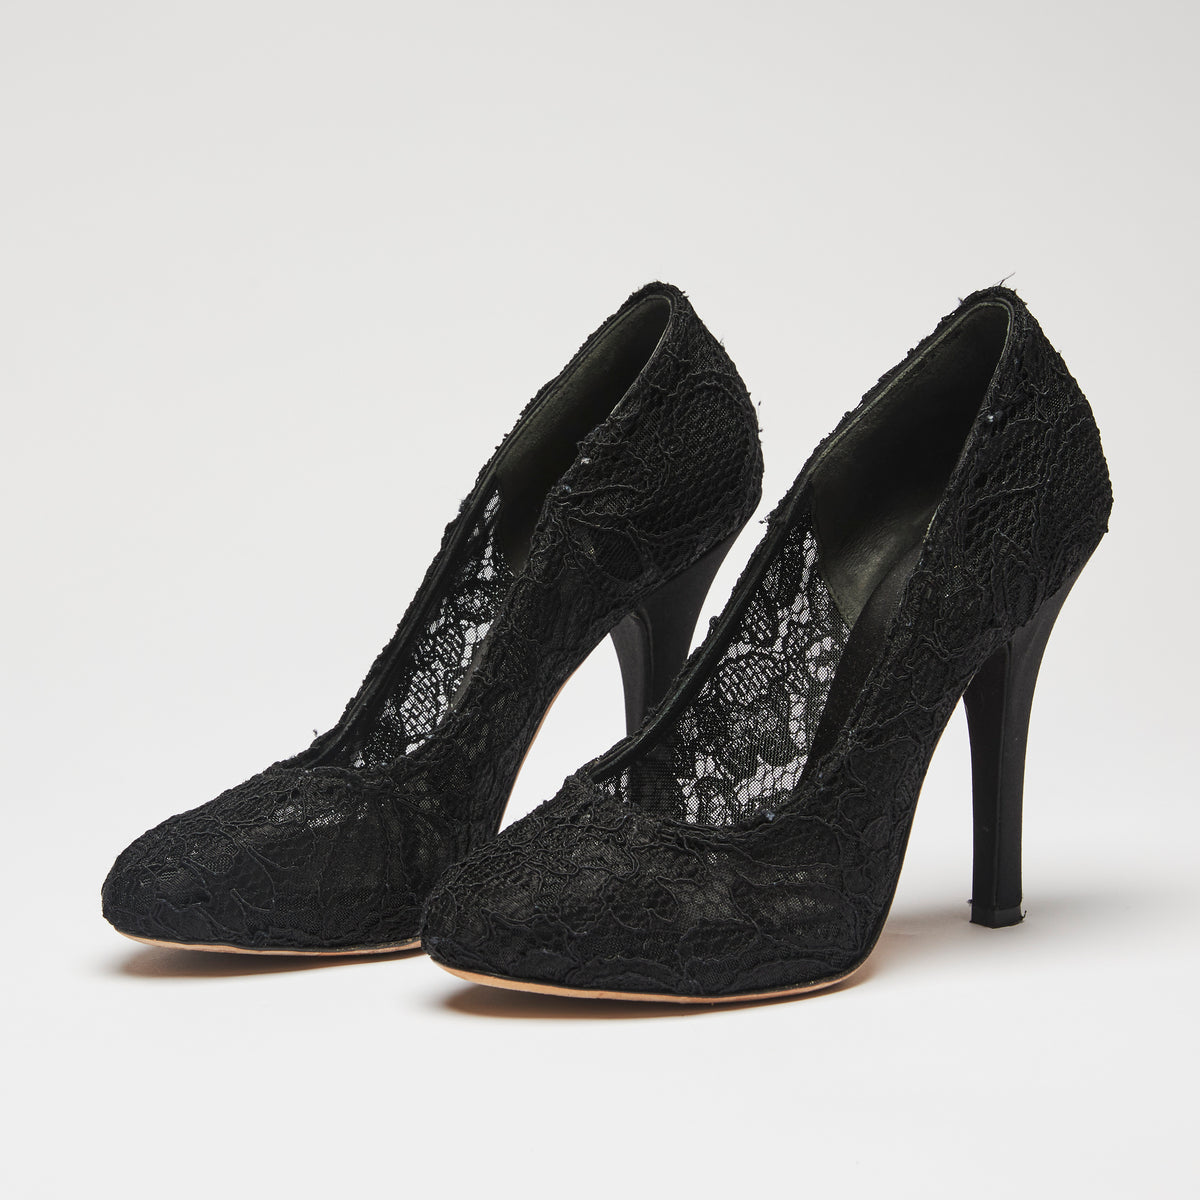 Pre-Loved Black Lace Fabric Round Toe Heels.(side)